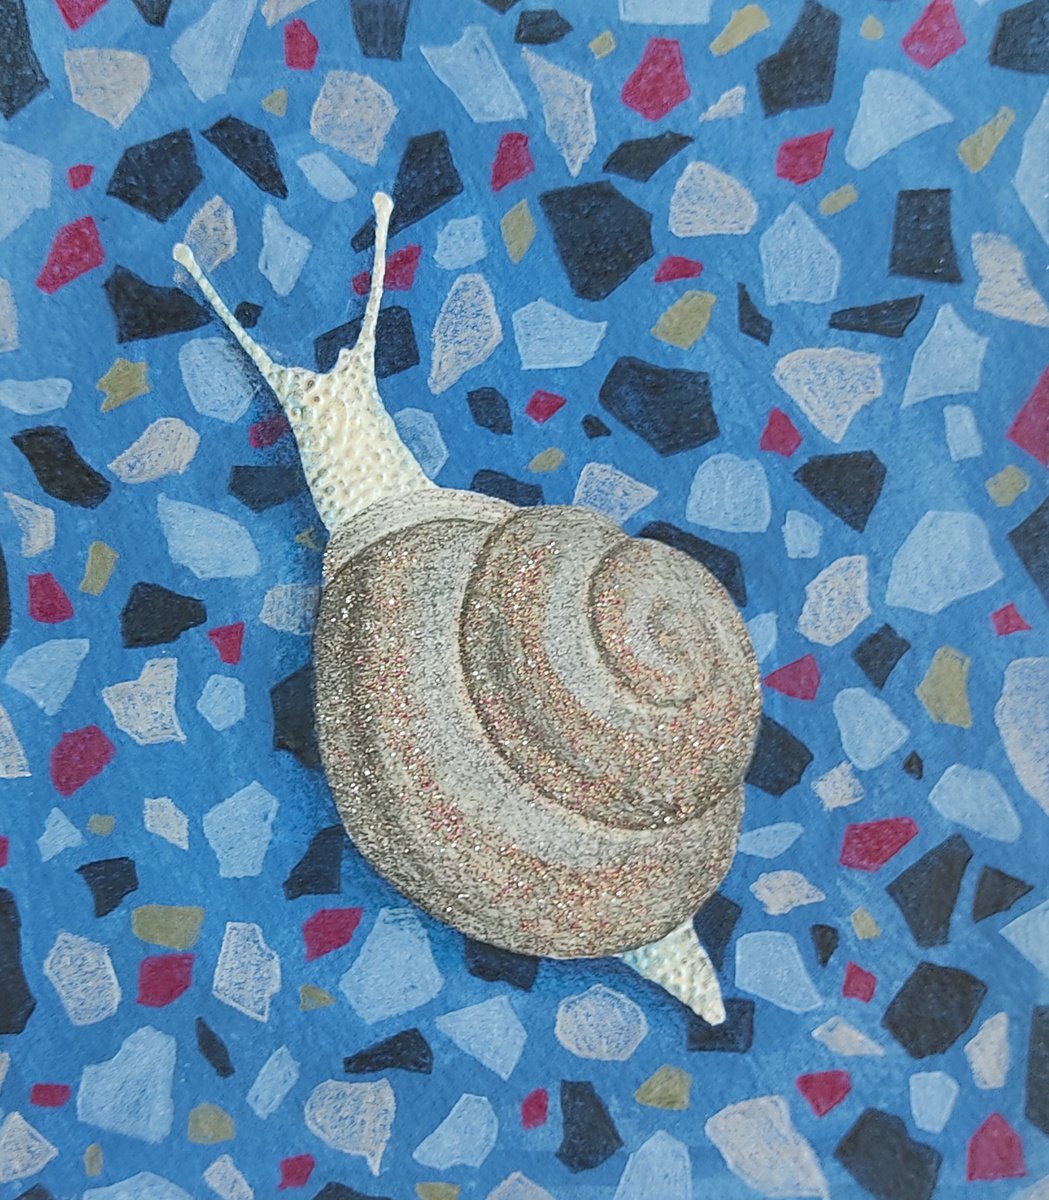 Snail by Andromachi Giannopoulou